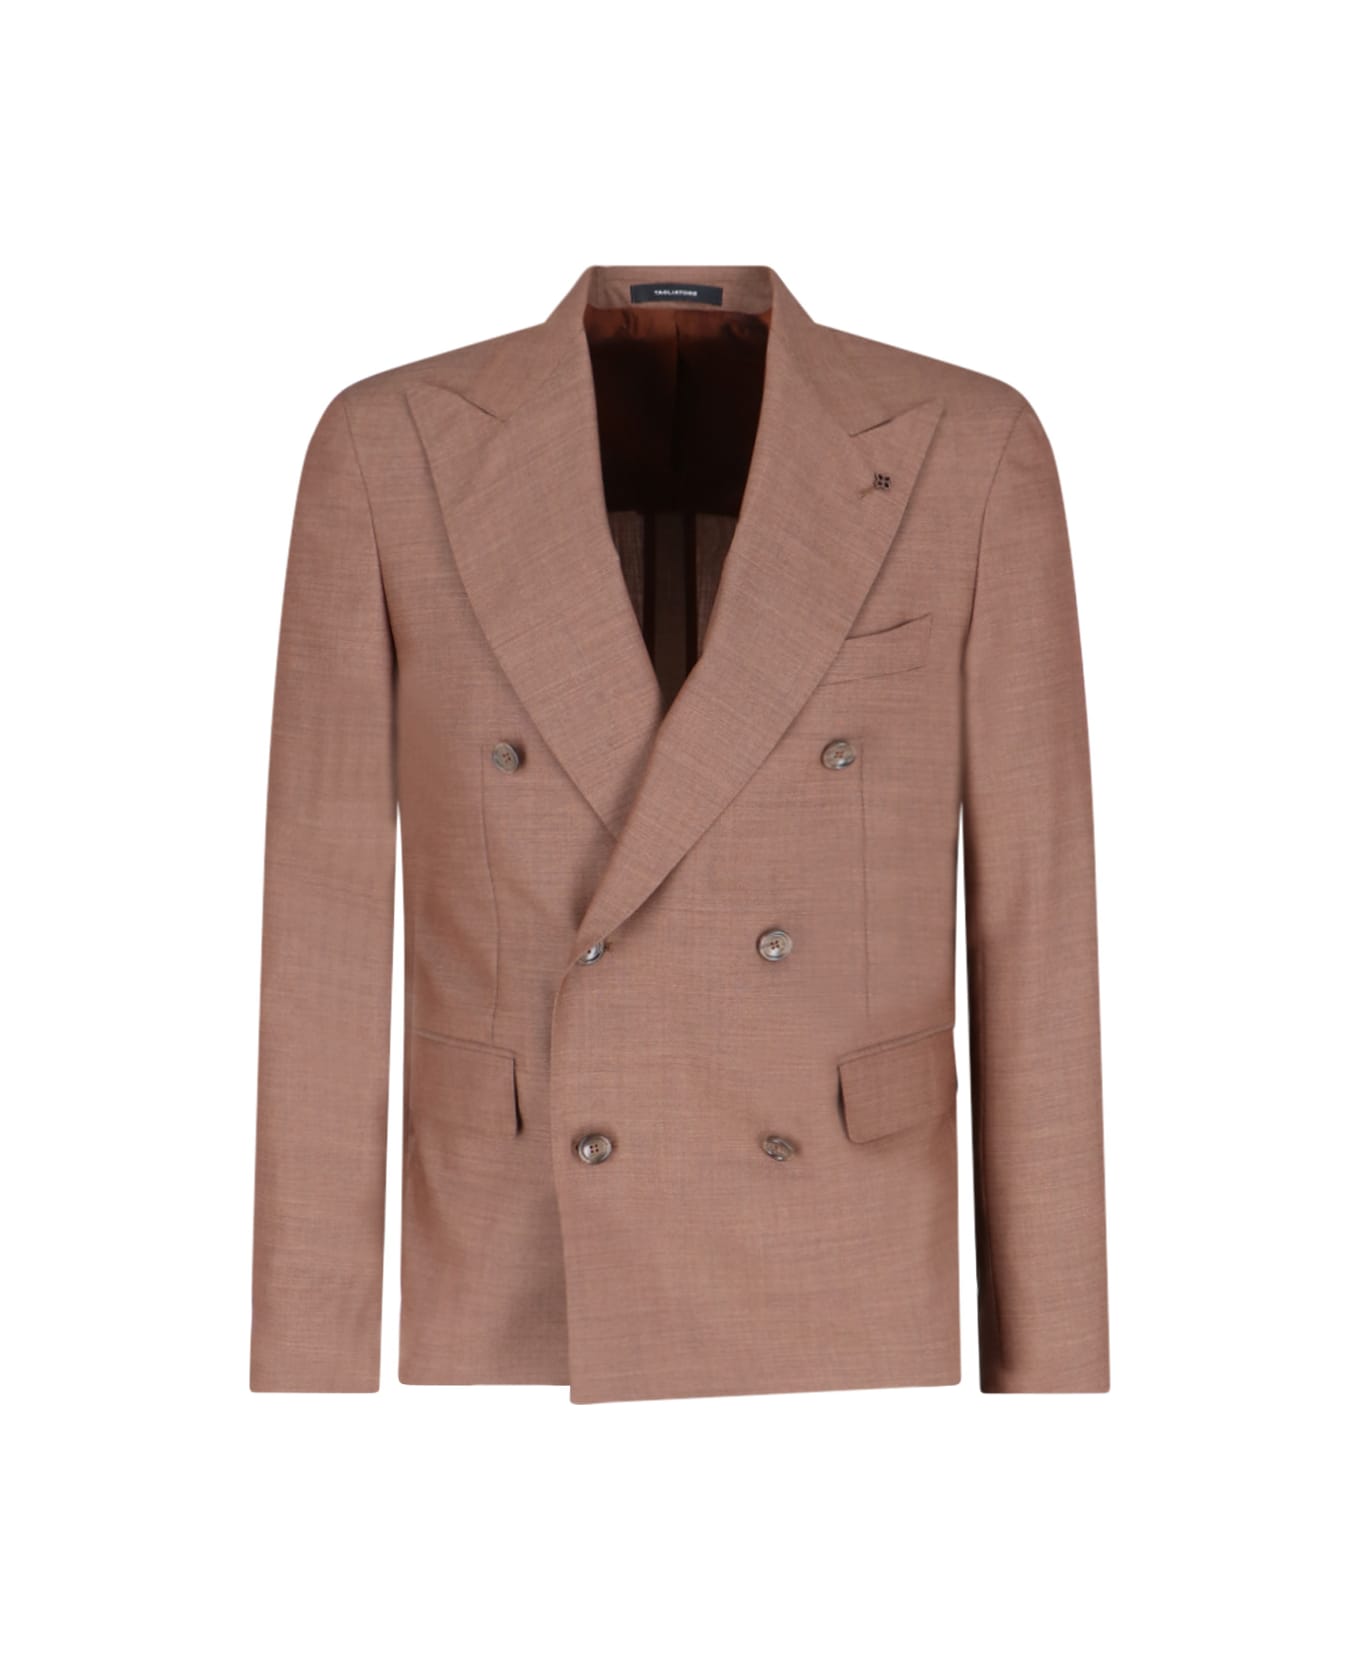 Tagliatore Double-breasted Suit - Brown スーツ